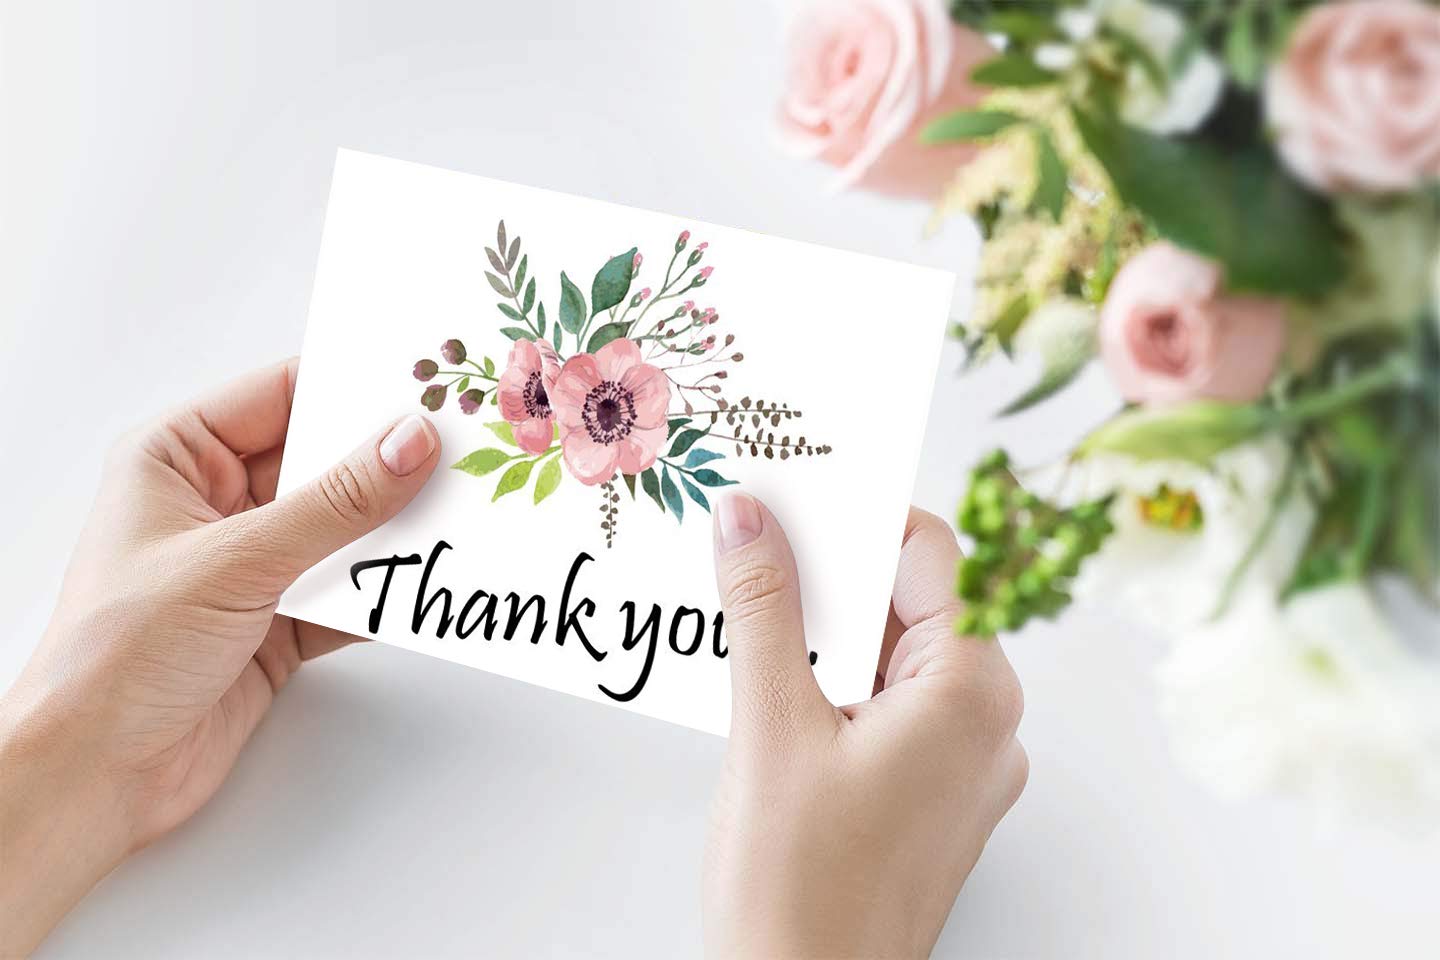 SUPHOUSE Teacher Thank You Cards with Envelopes Set, Thank You Cards Teacher Appreciation,Small Business,Baby Shower Thank You Cards, Wedding Thank You Cards Pink Floral Style,48 Bulk Pack